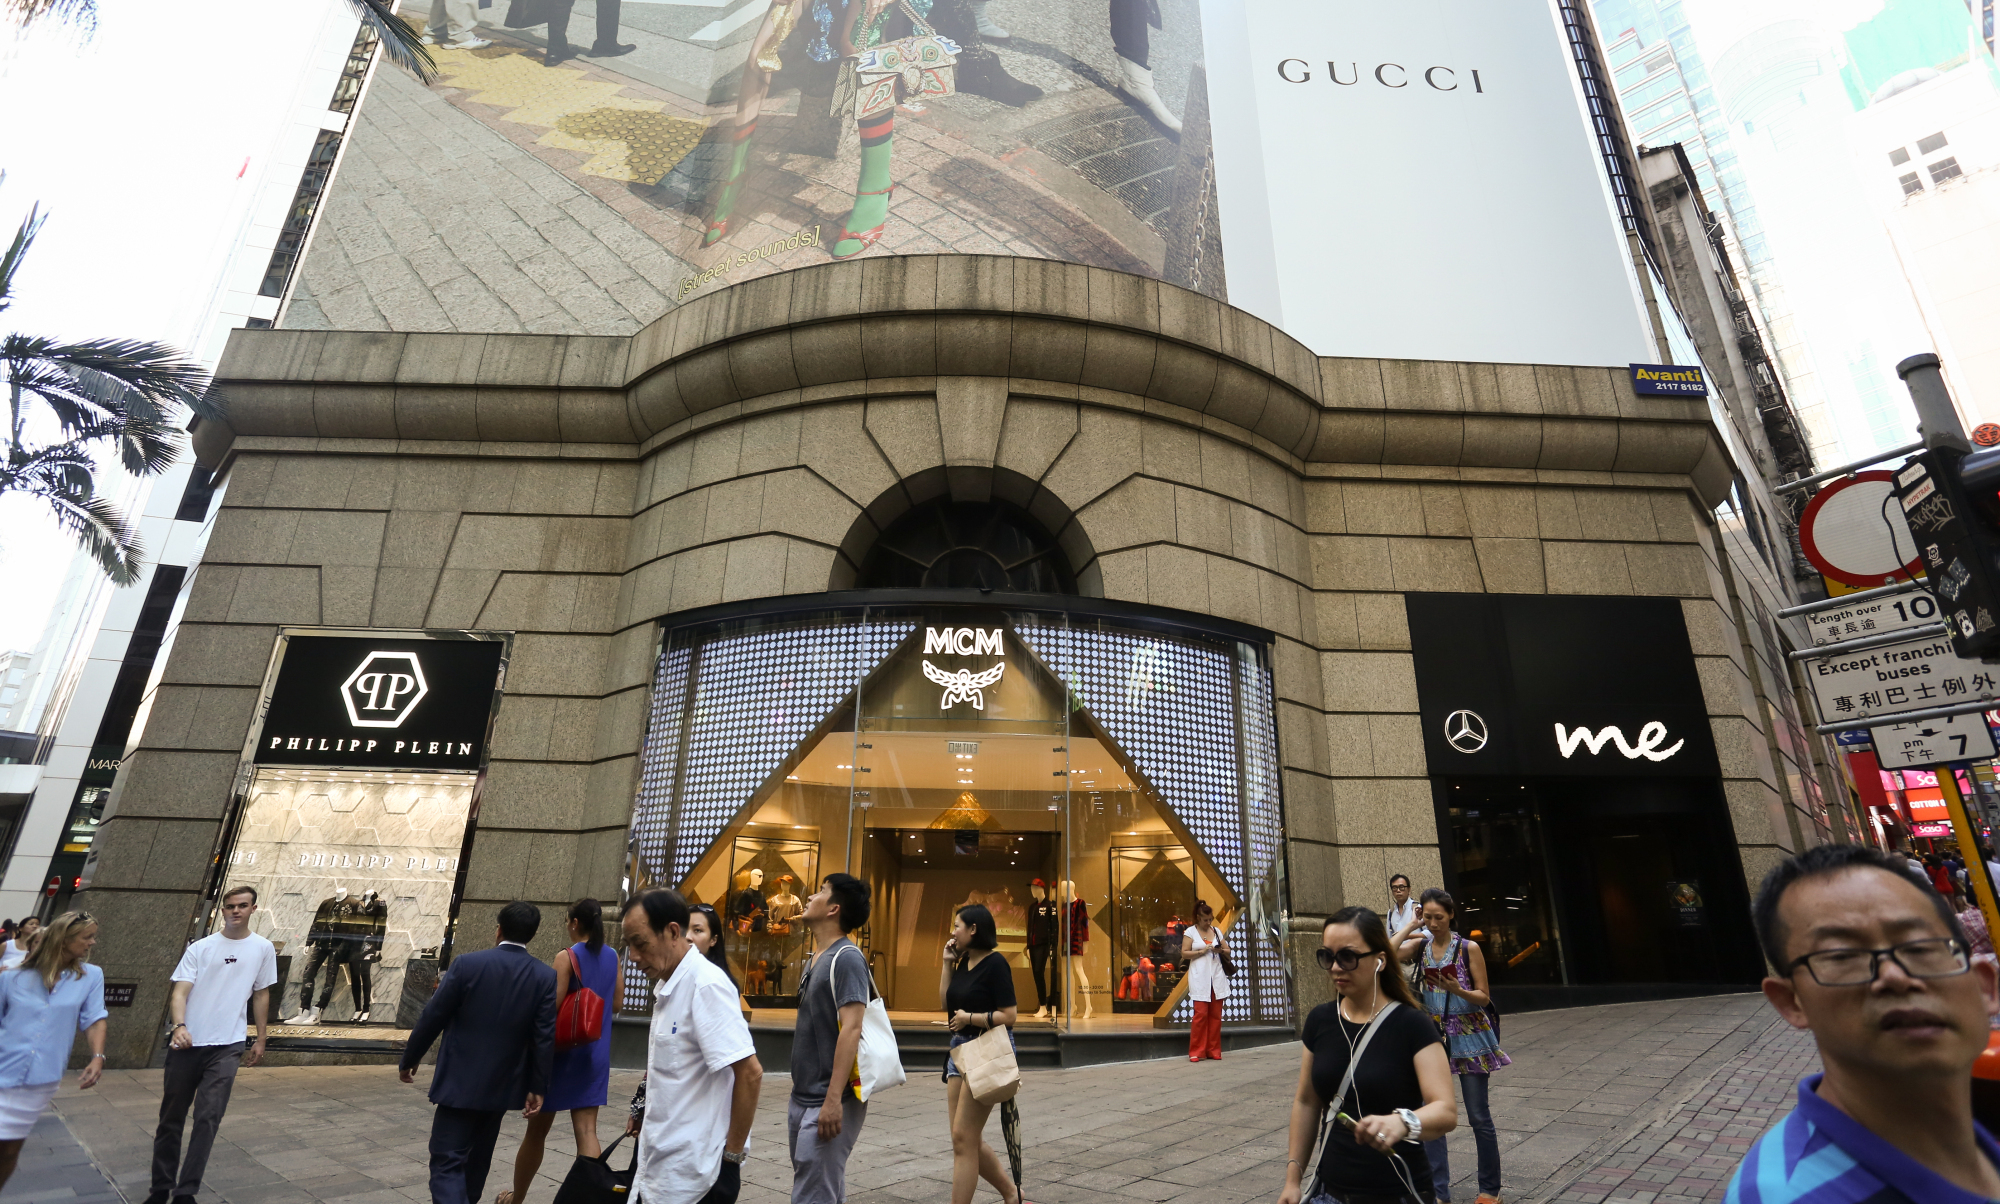 Opinion: Why K-pop idols are the new faces of global luxury: from  Blackpink's Lisa representing Celine to Exo's Kai modelling for Gucci,  Korean celebrities can pull in millennial customers from China, the